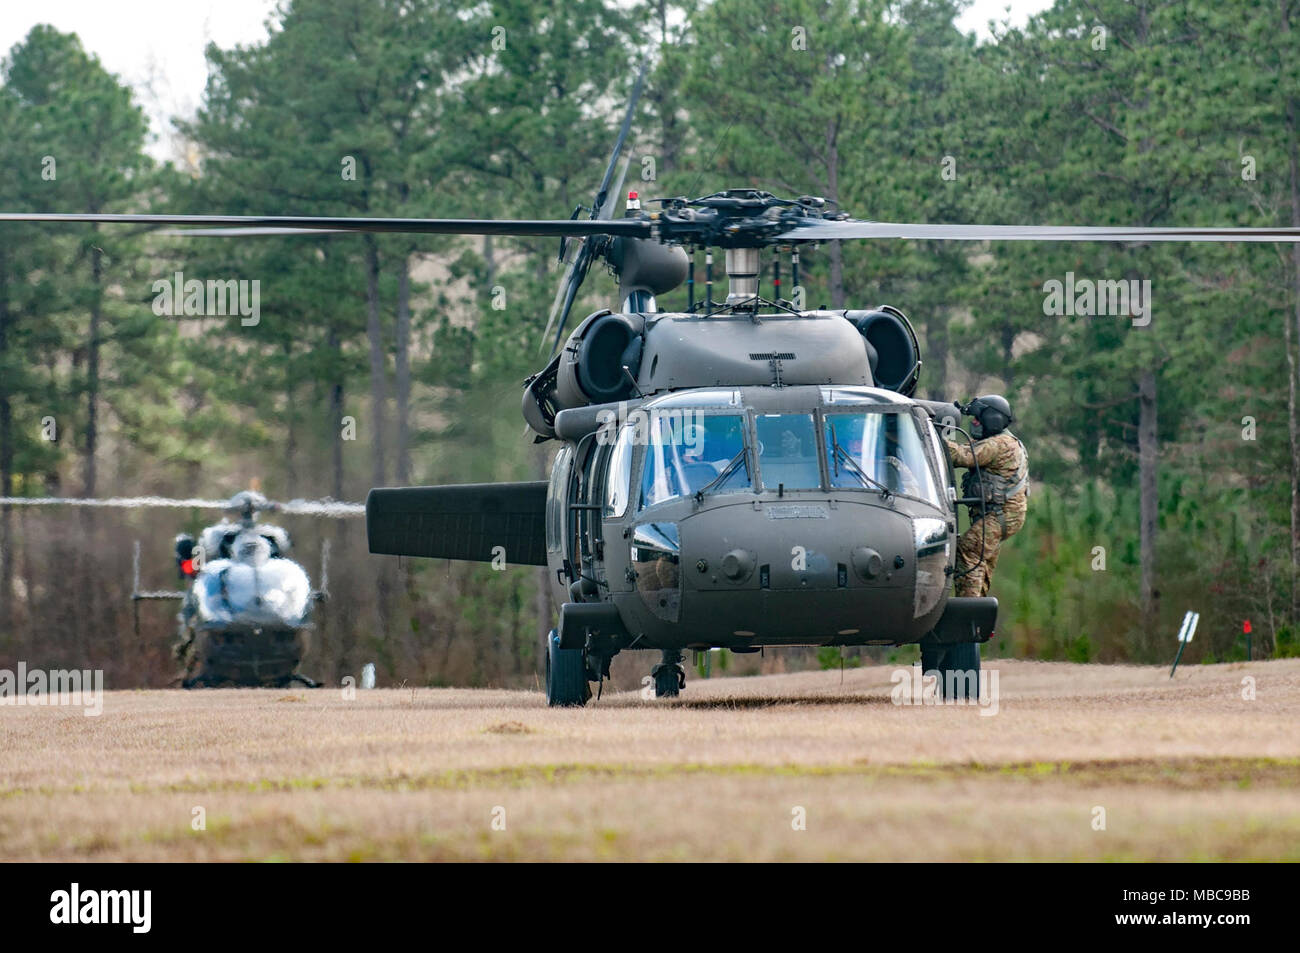 A UH-60 Black Hawk from the South Carolina Army National Guard waits to take off and perform rescue hoist operations with the South Carolina Helicopter Aquatic Rescue Team during the exercise PATRIOT South 18 at Camp Shelby, Miss. on Feb. 15, 2018. PATRIOT South is a joint-agency, domestic operations exercise, focused on natural disaster preparedness and includes National Guard and civilian first responder units from across the country. (Ohio Air National Guard Stock Photo